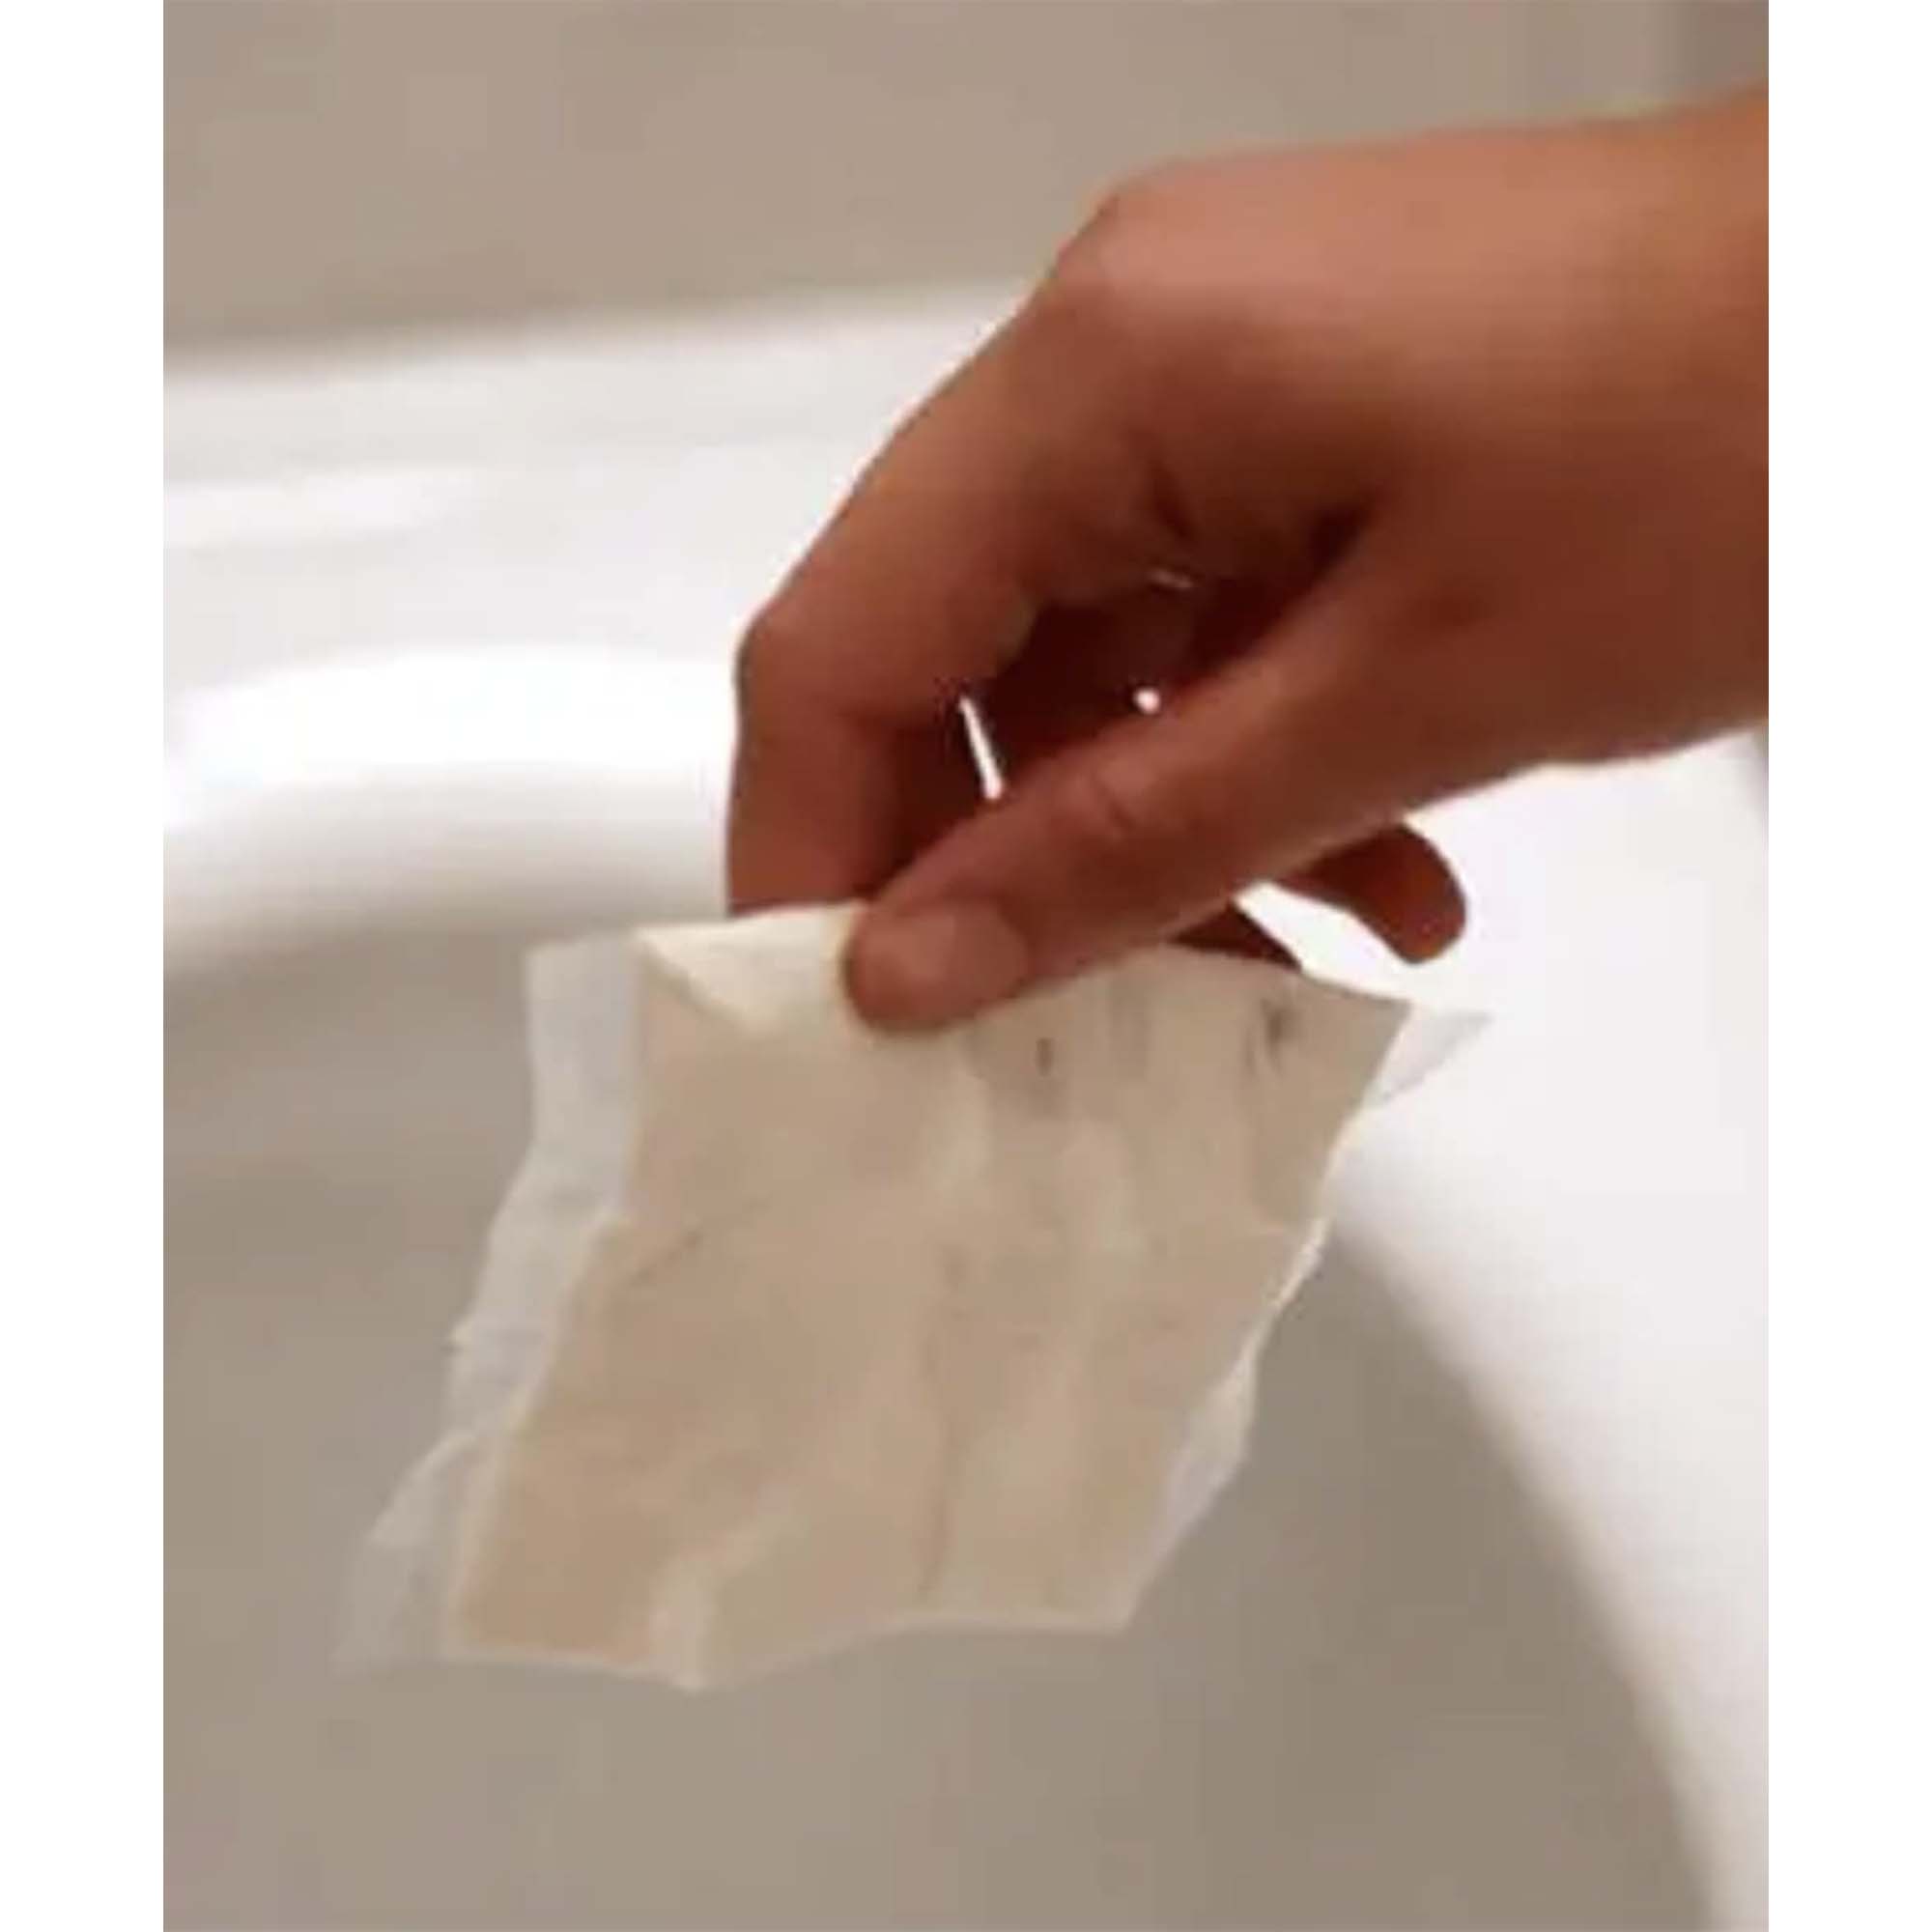 Cesclean sachet being dropped into the toilet